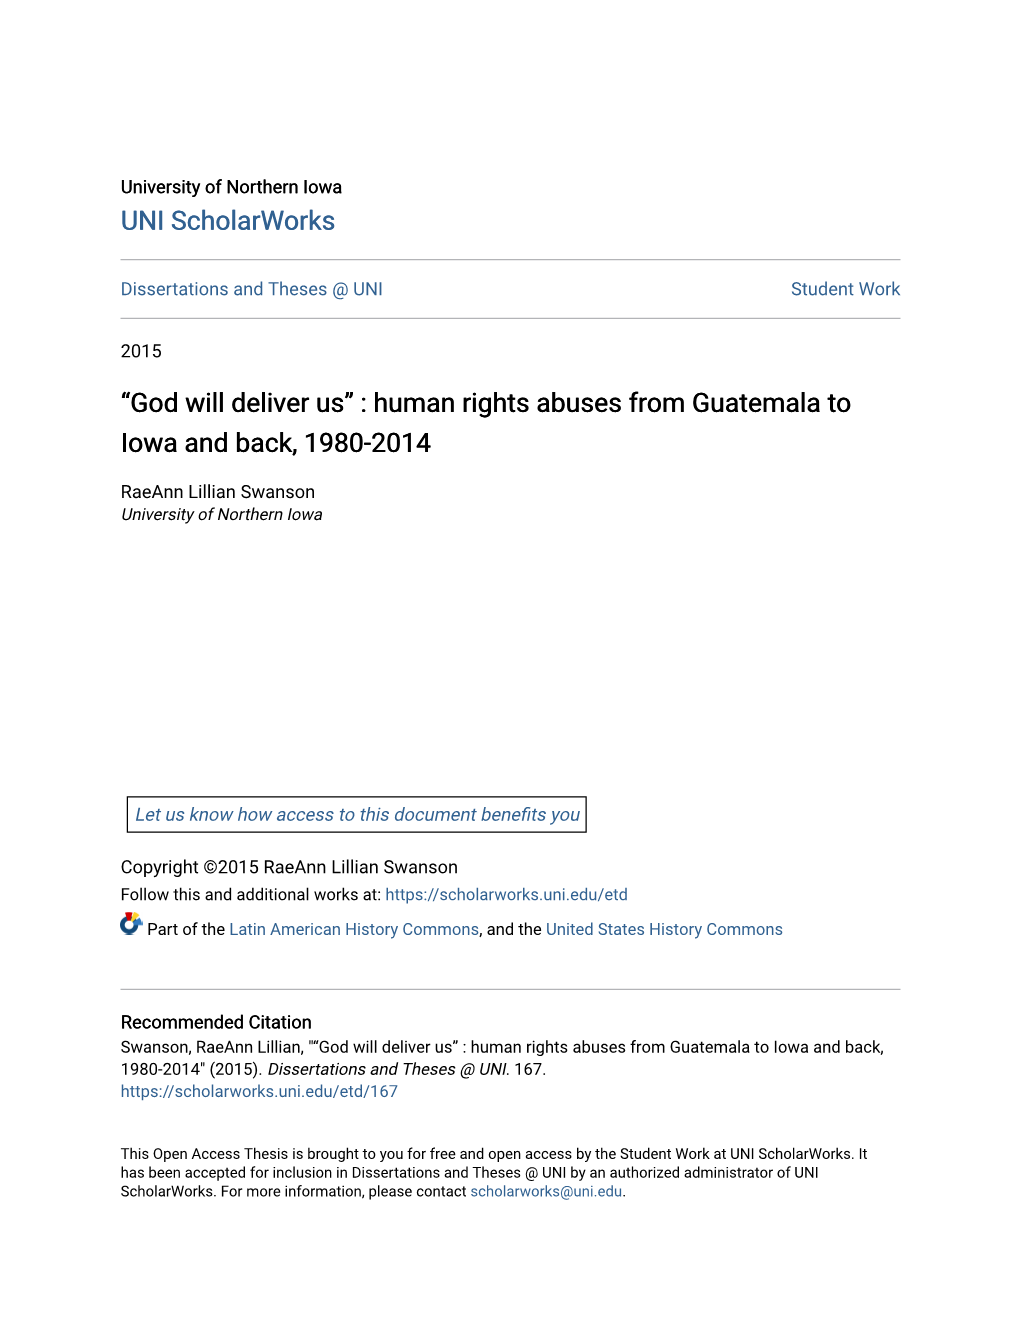 Human Rights Abuses from Guatemala to Iowa and Back, 1980-2014